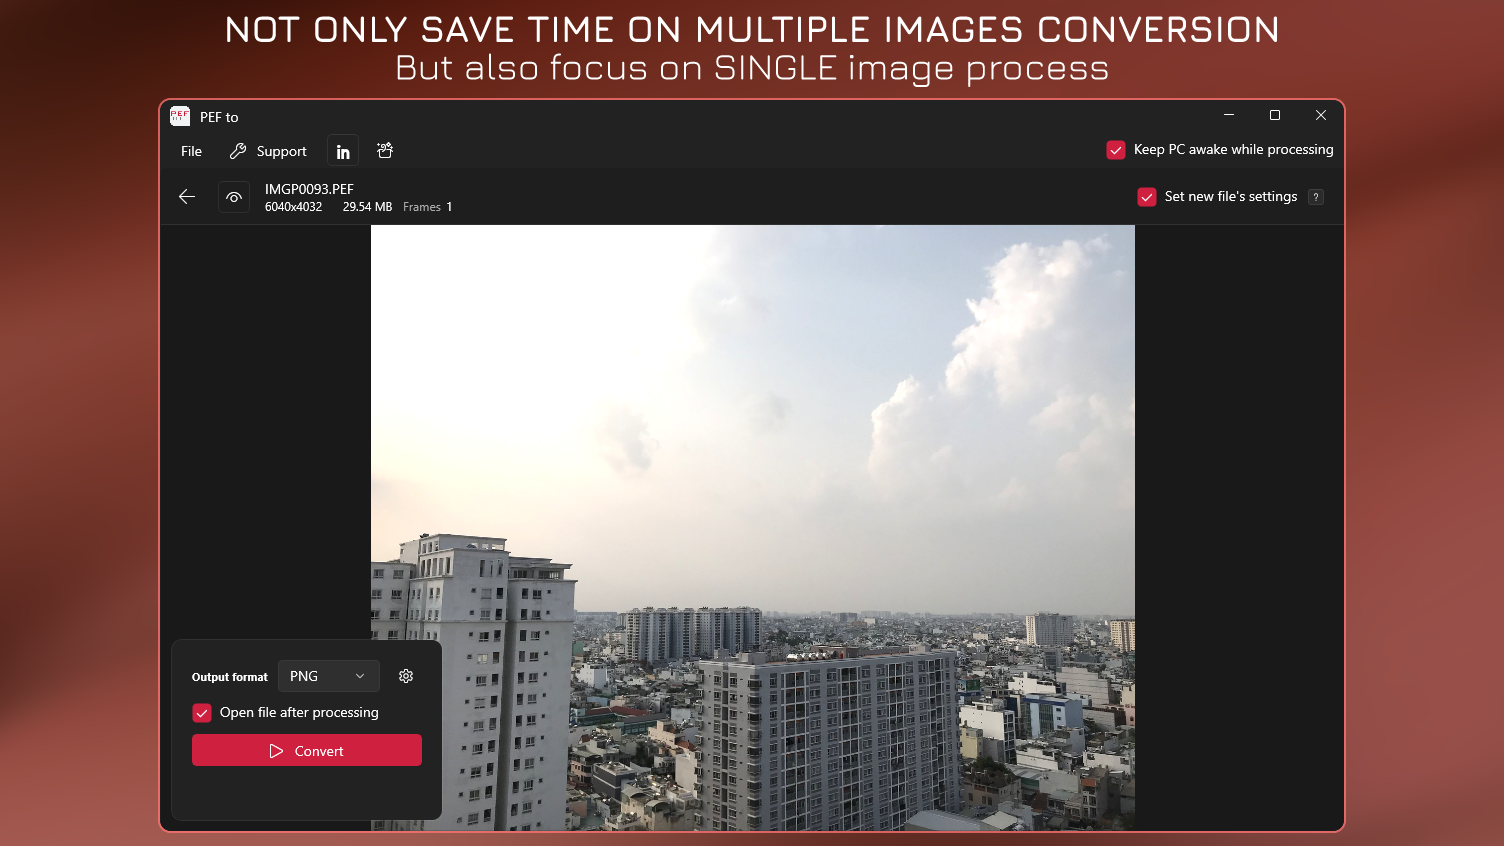 Not Only Save Time in Multiple Images Conversion - But also focus on Single image process.